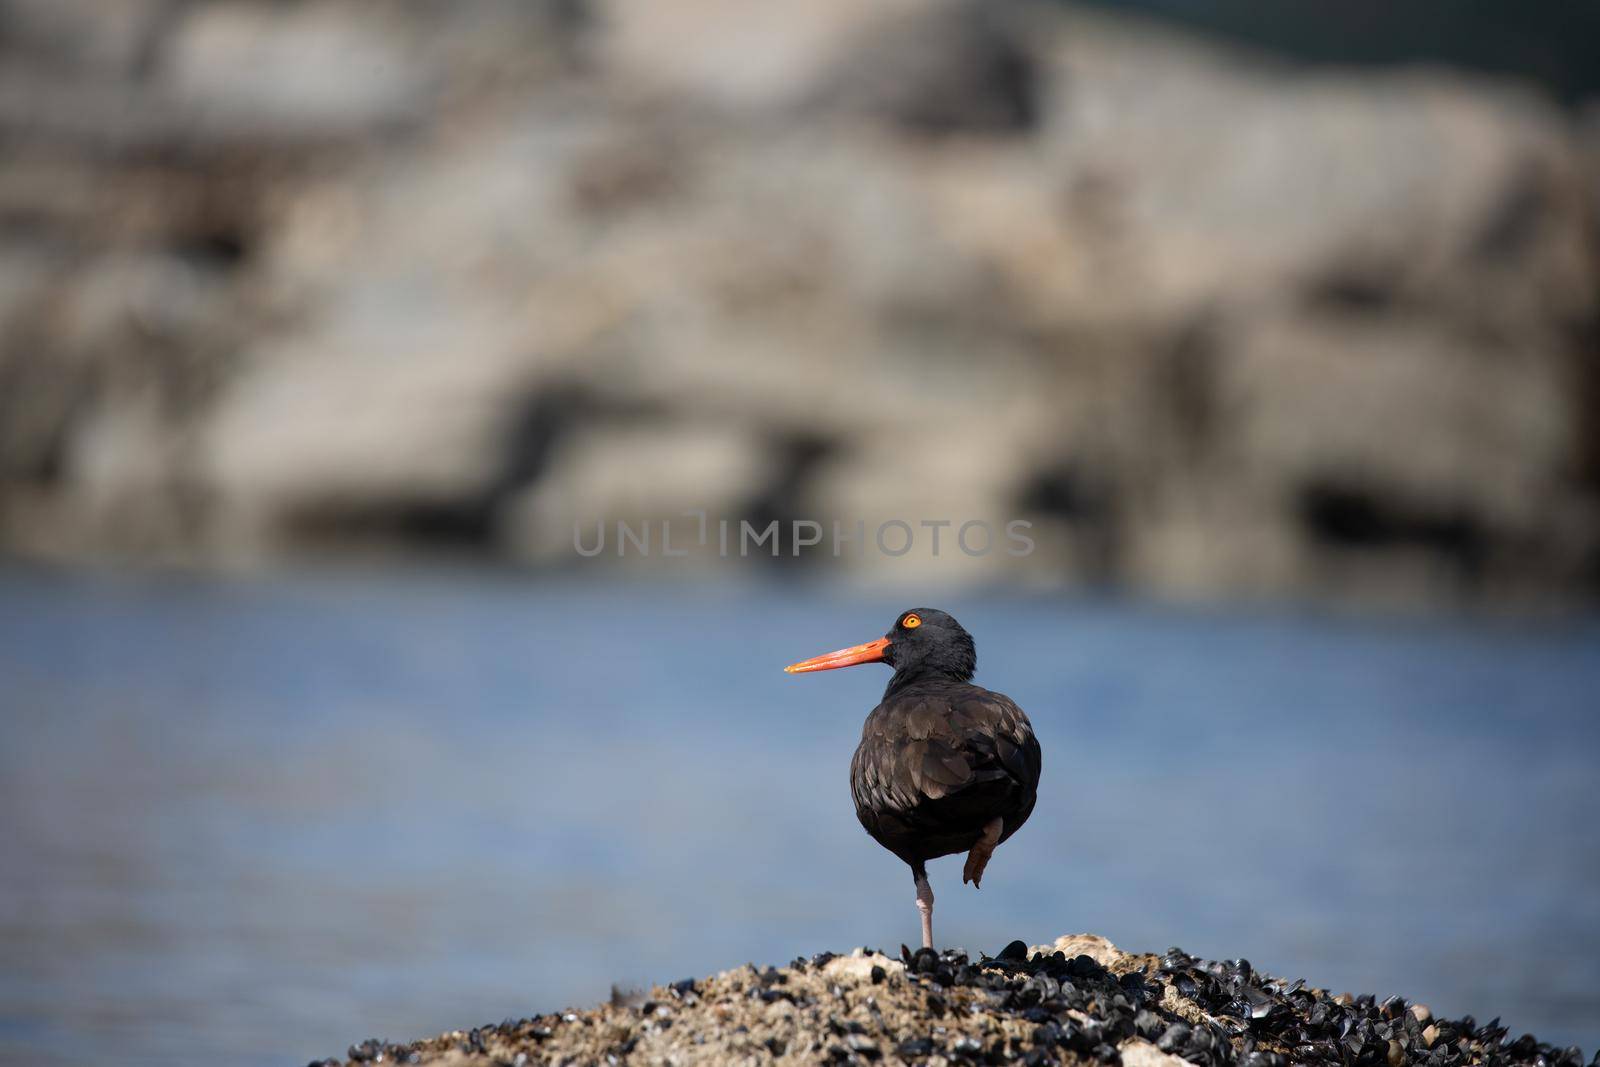 Black oystercatcher walking on a shell covered rock with water in the background, near Ballet Bay, Sunshine Coast, British Columbia